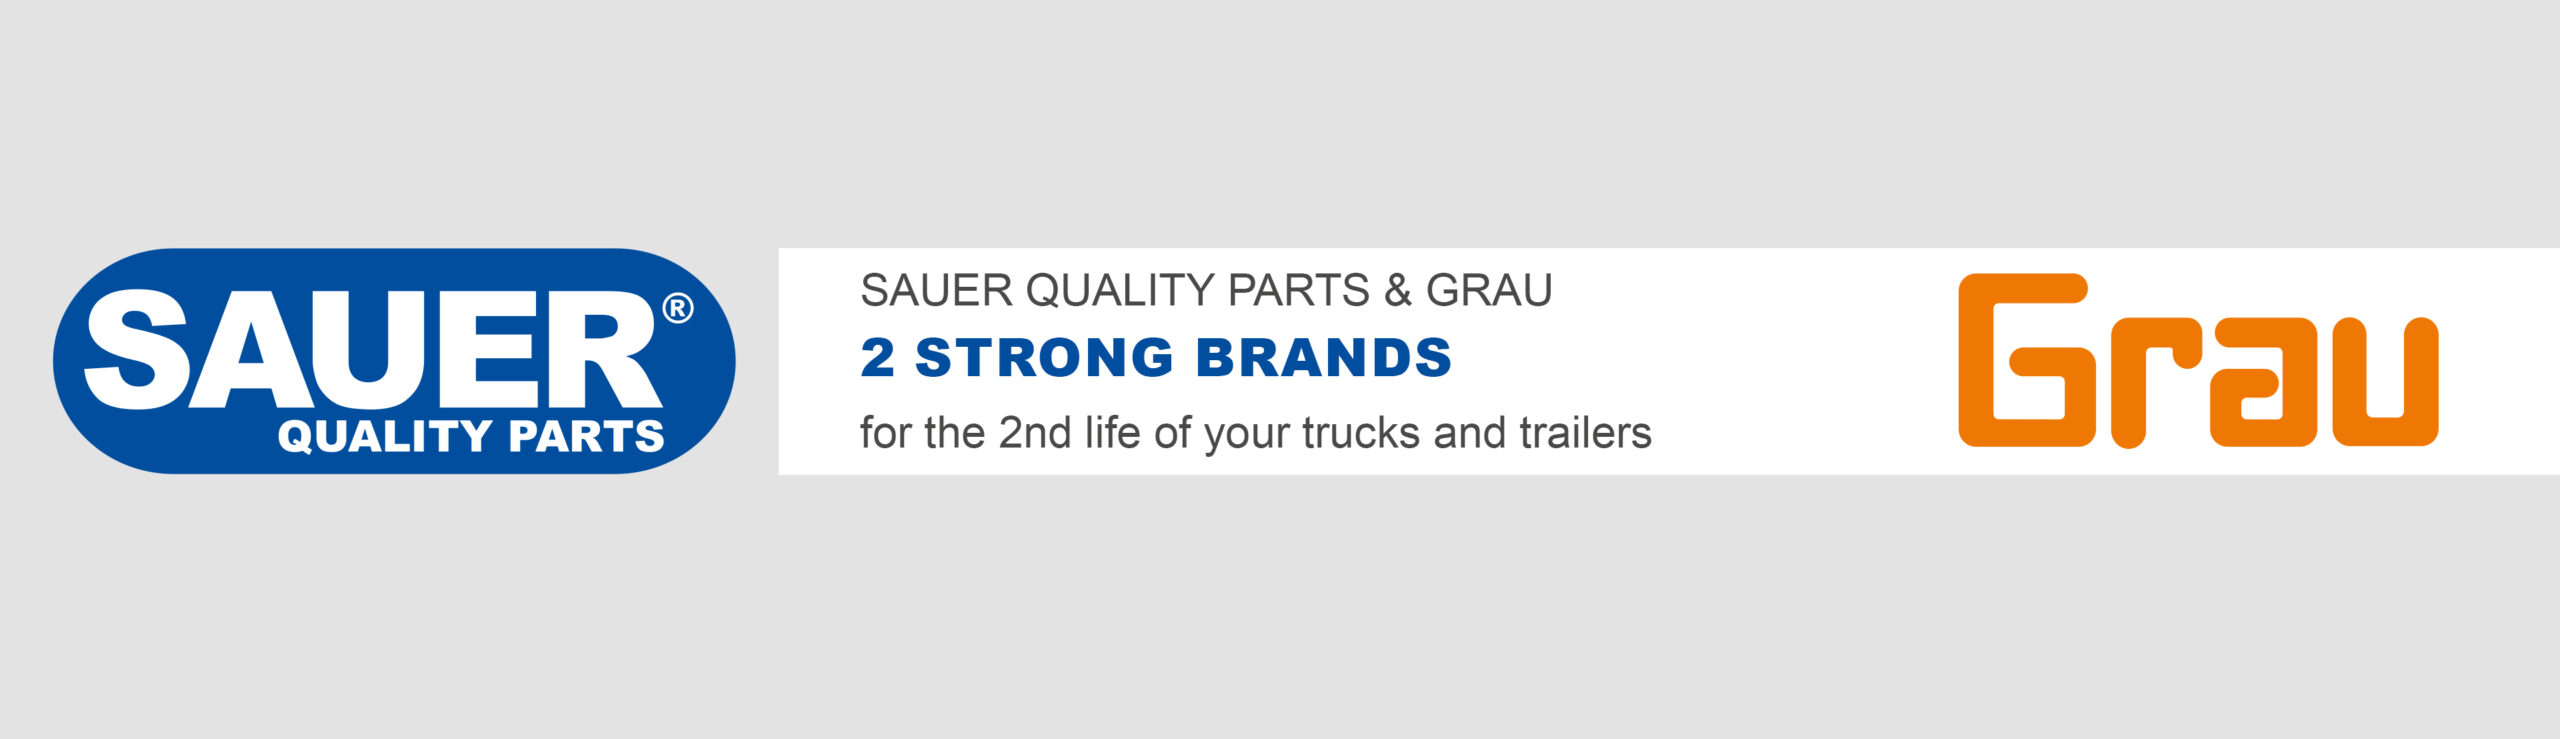 SAUER QUALITY PARTS - Integration of Grau - 2nd life of trucks and trailers